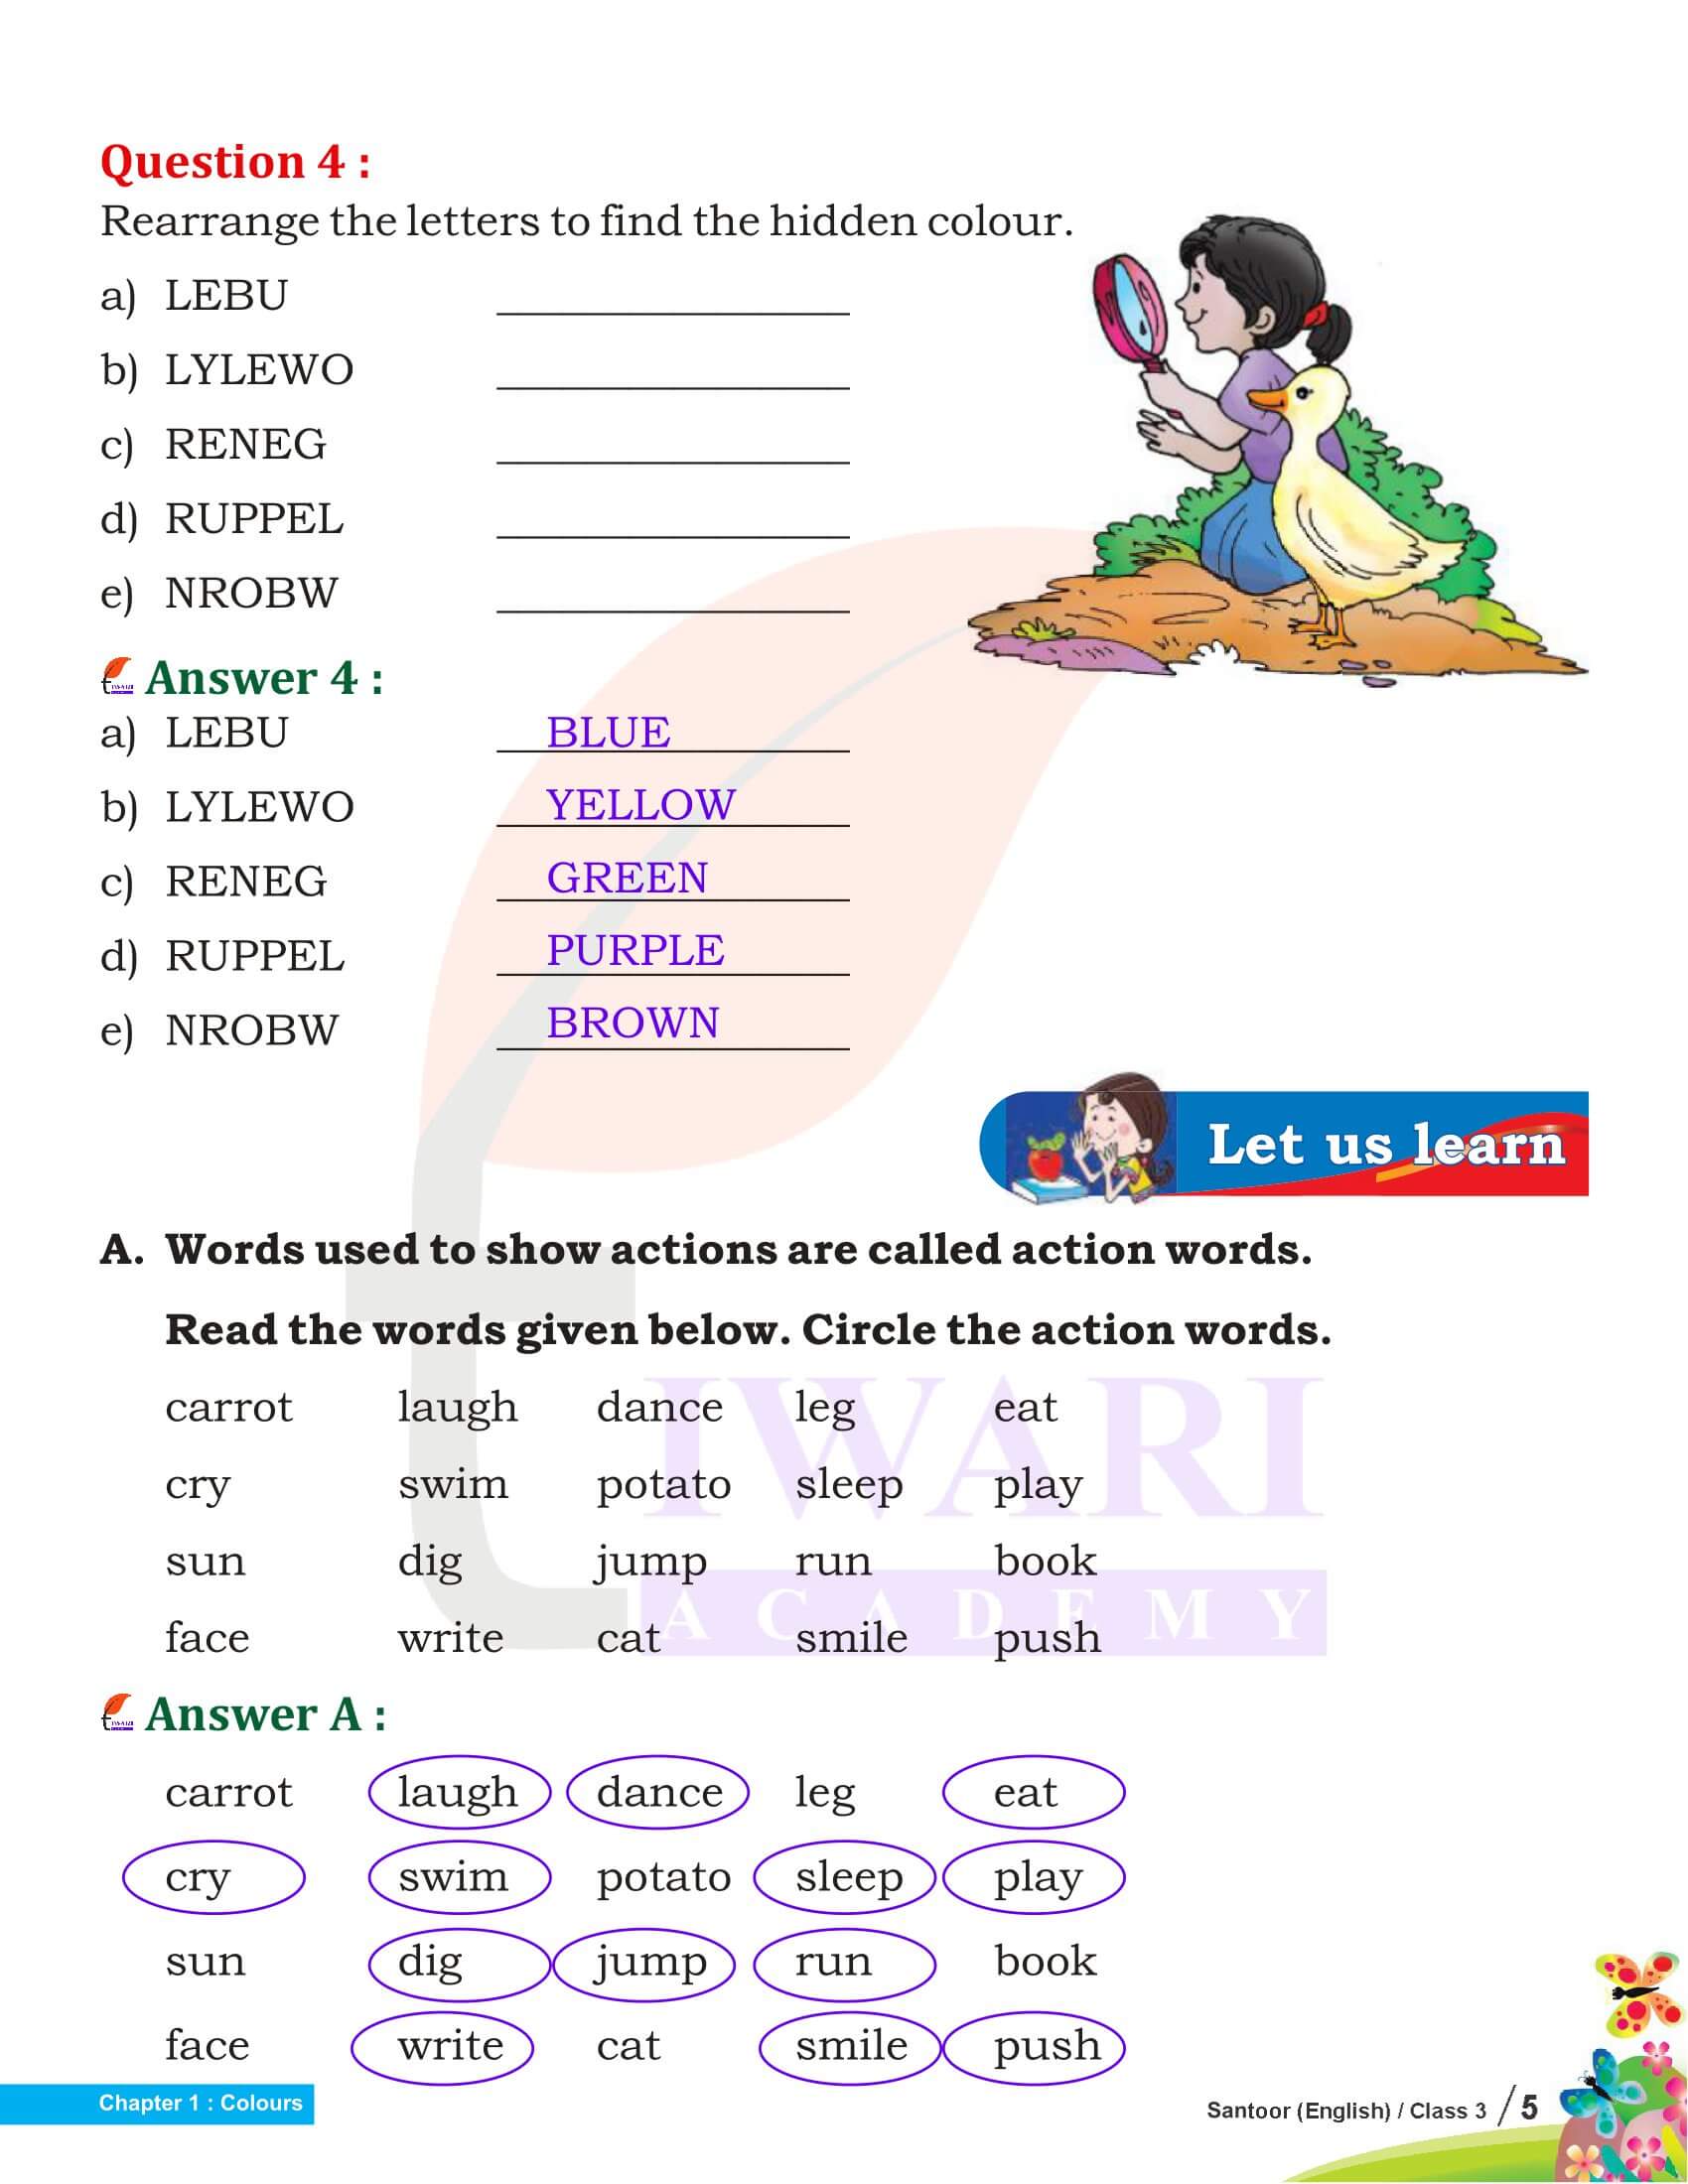 Class 3 English Santoor Chapter 1 Colours Answers